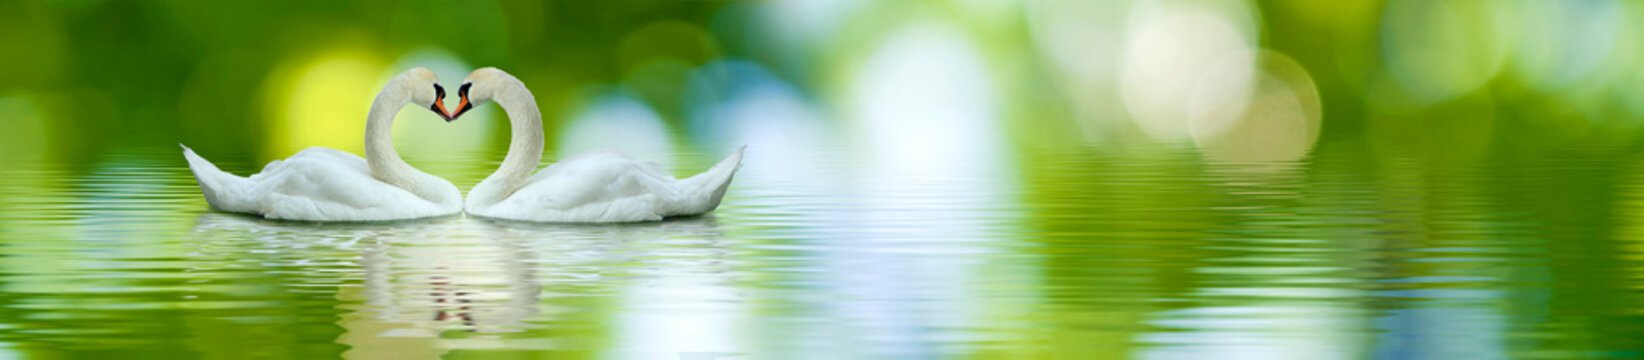 image of two swans on a lake close up